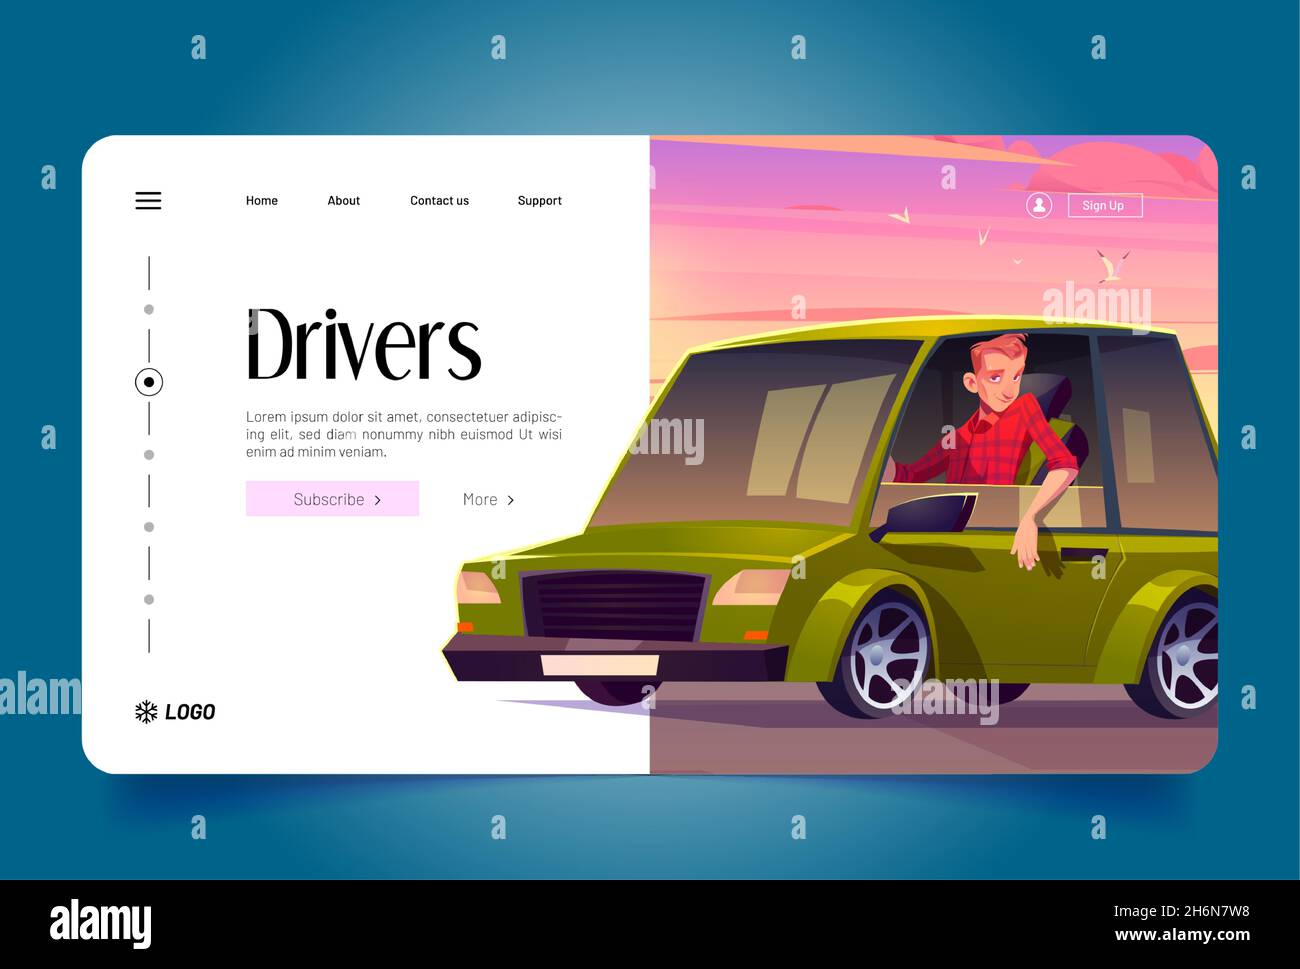 Drivers banner with man sitting in green car on background of sunset pink sky. Vector landing page of professional driving and chauffeur job with cartoon illustration of character in vehicle Stock Vector